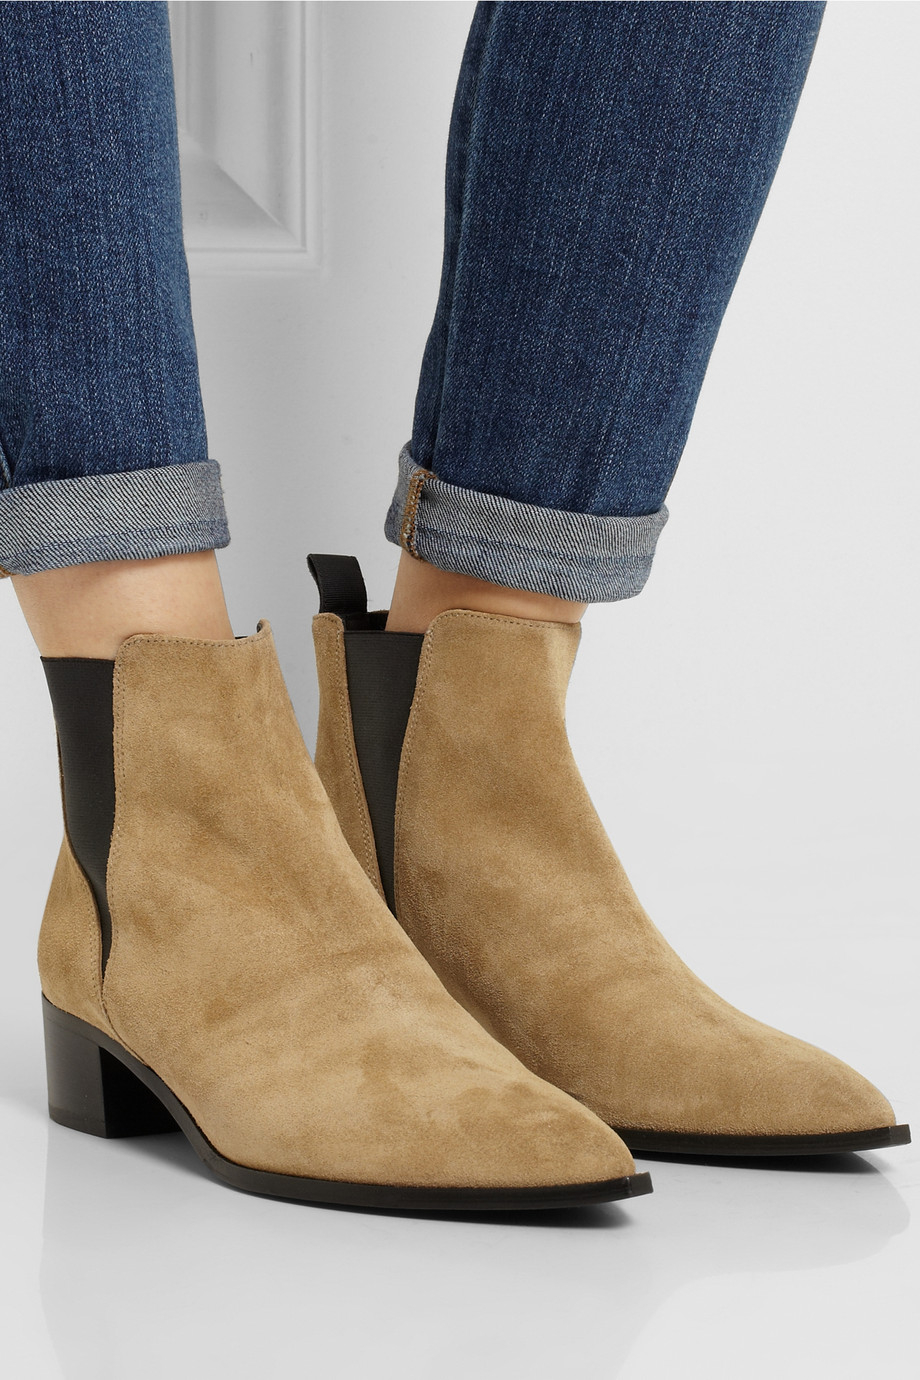 Acne Studios Jensen Suede Ankle Boots in Brown - Lyst